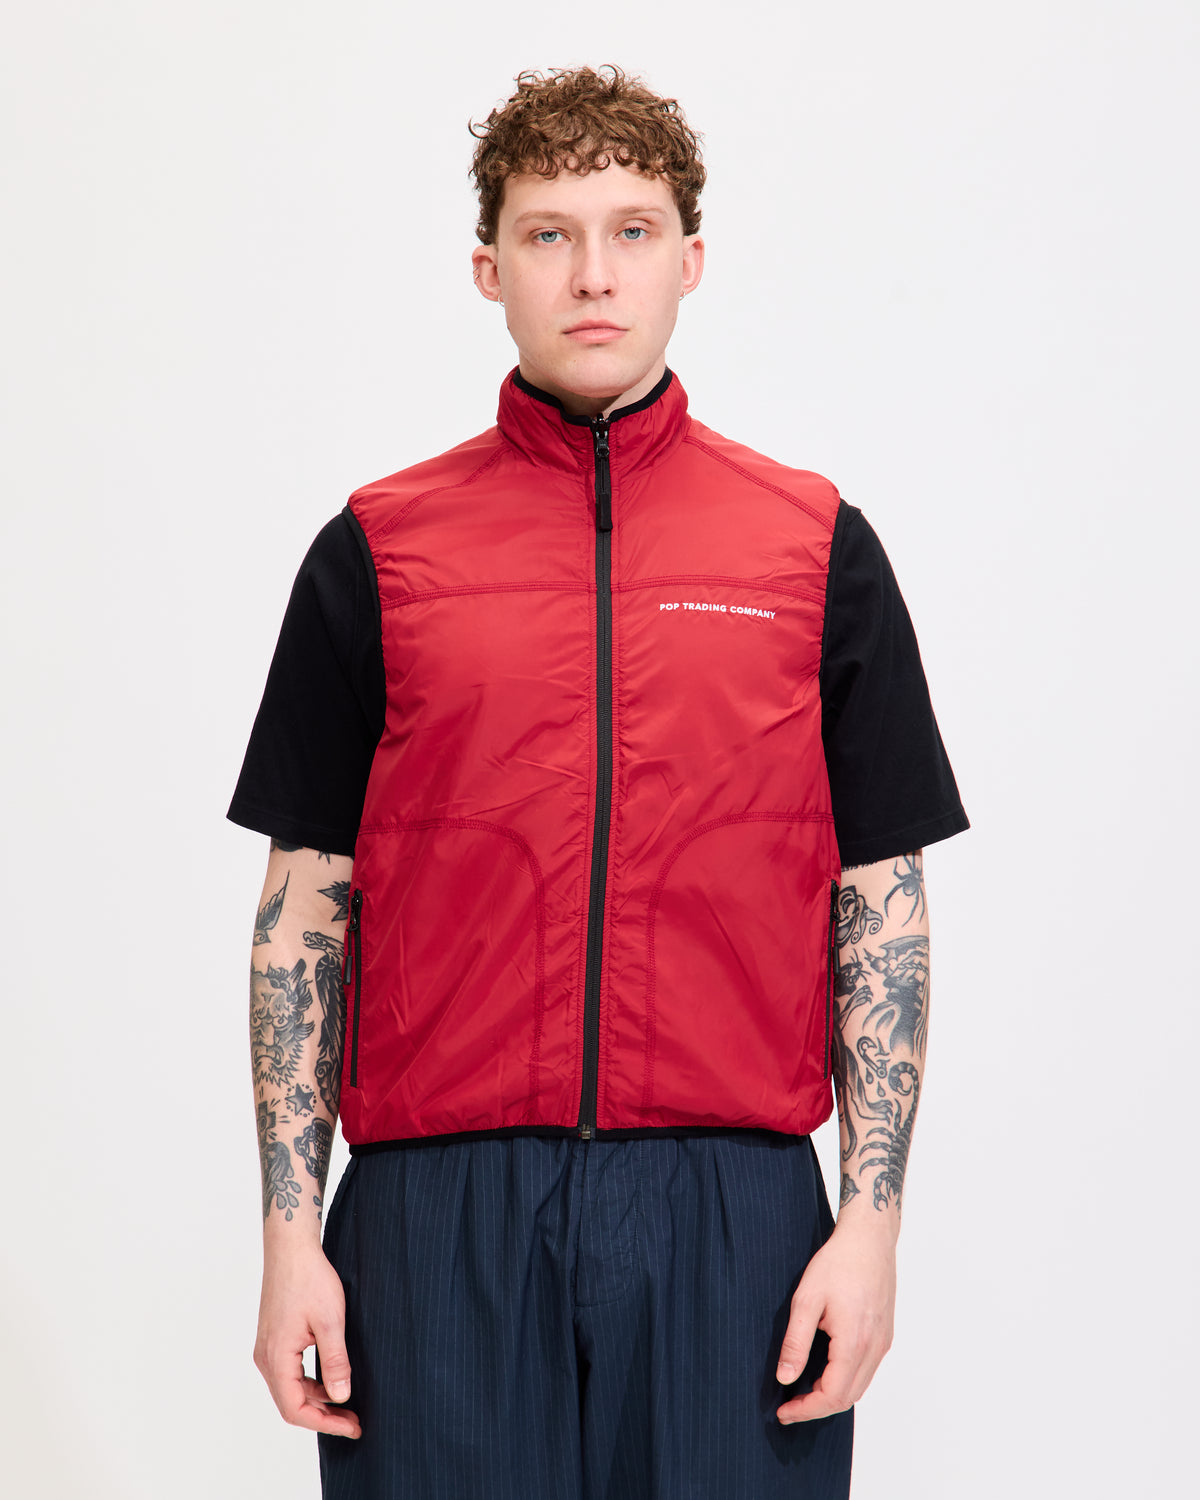 Reversible Vest in Anthracite/Rio Red